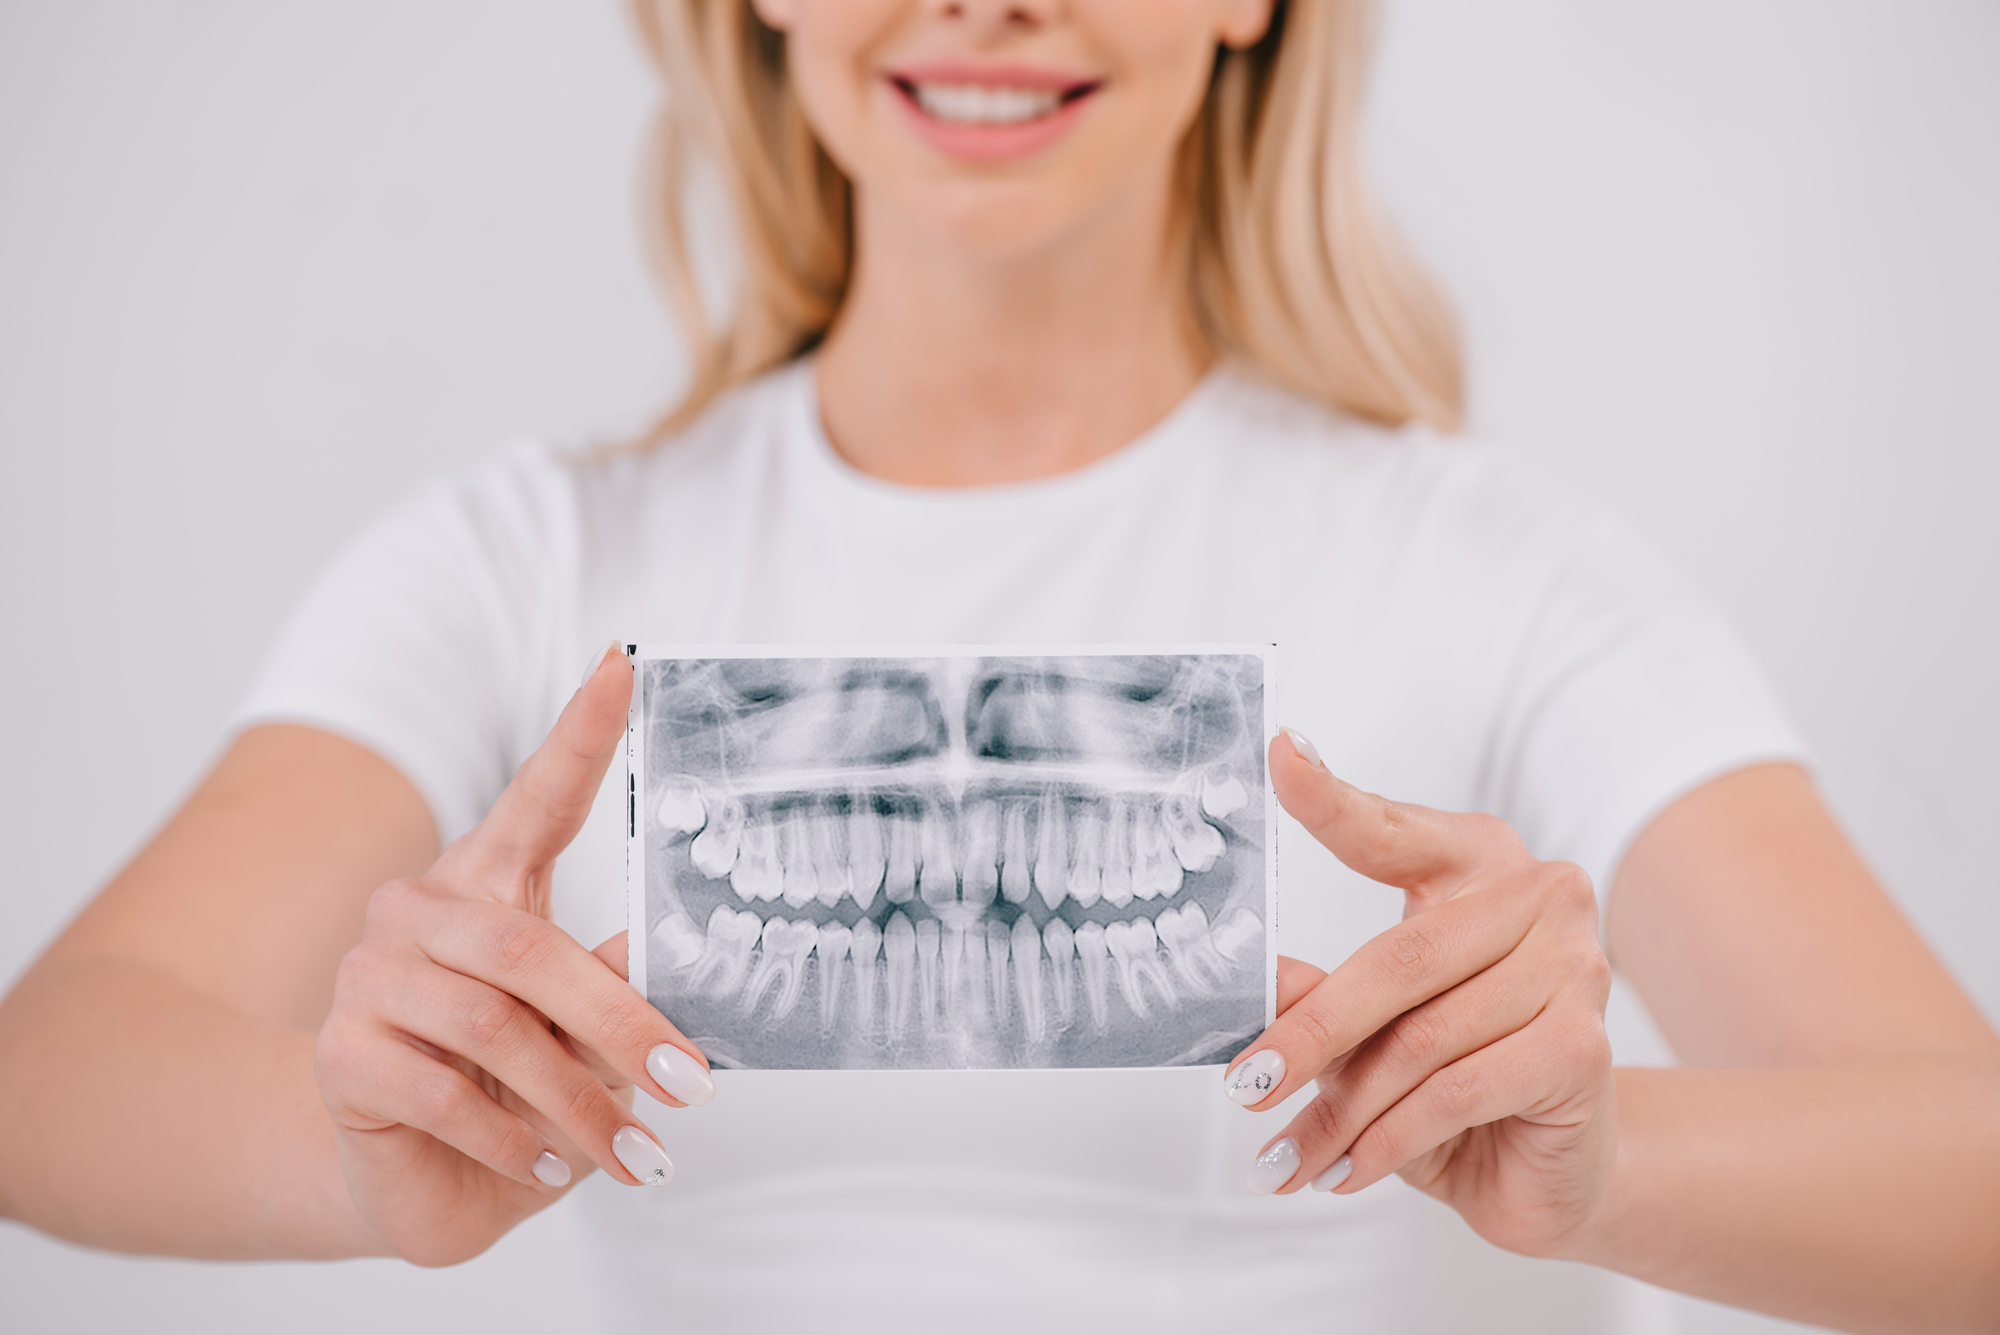 Woman with healthy teeth holding dental x-ray